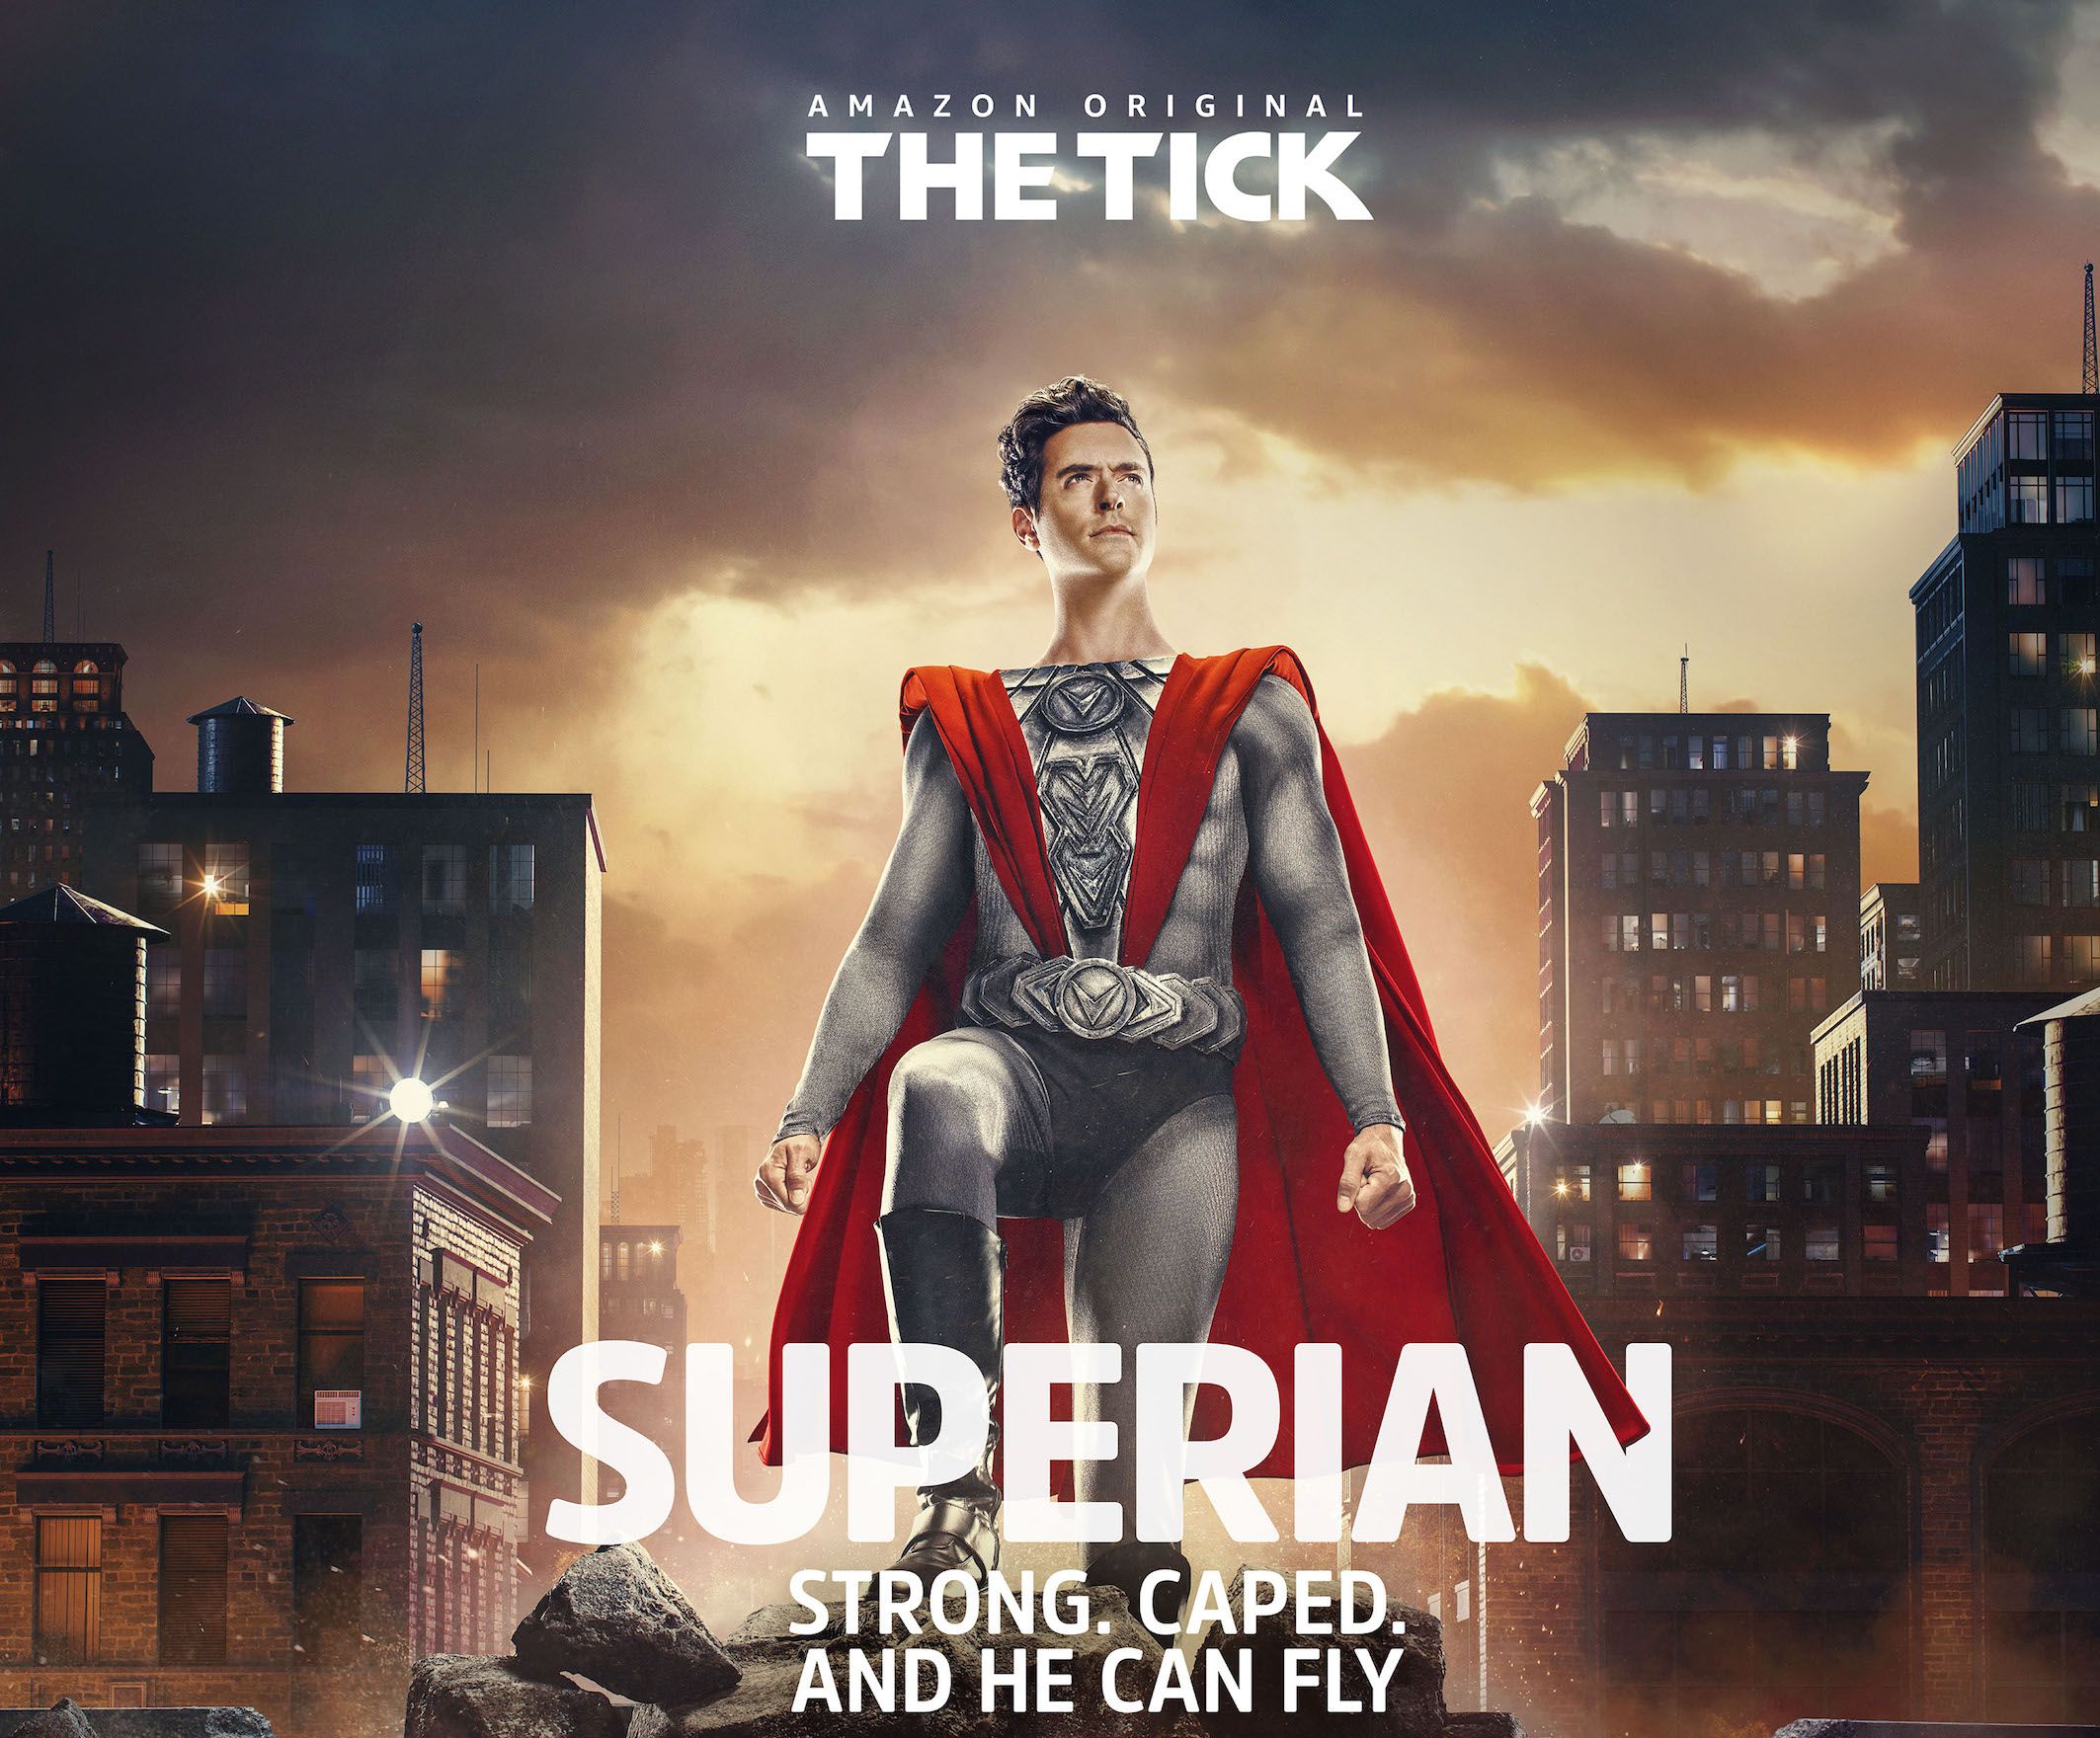 TV Show The Tick (2016) HD Wallpaper | Background Image